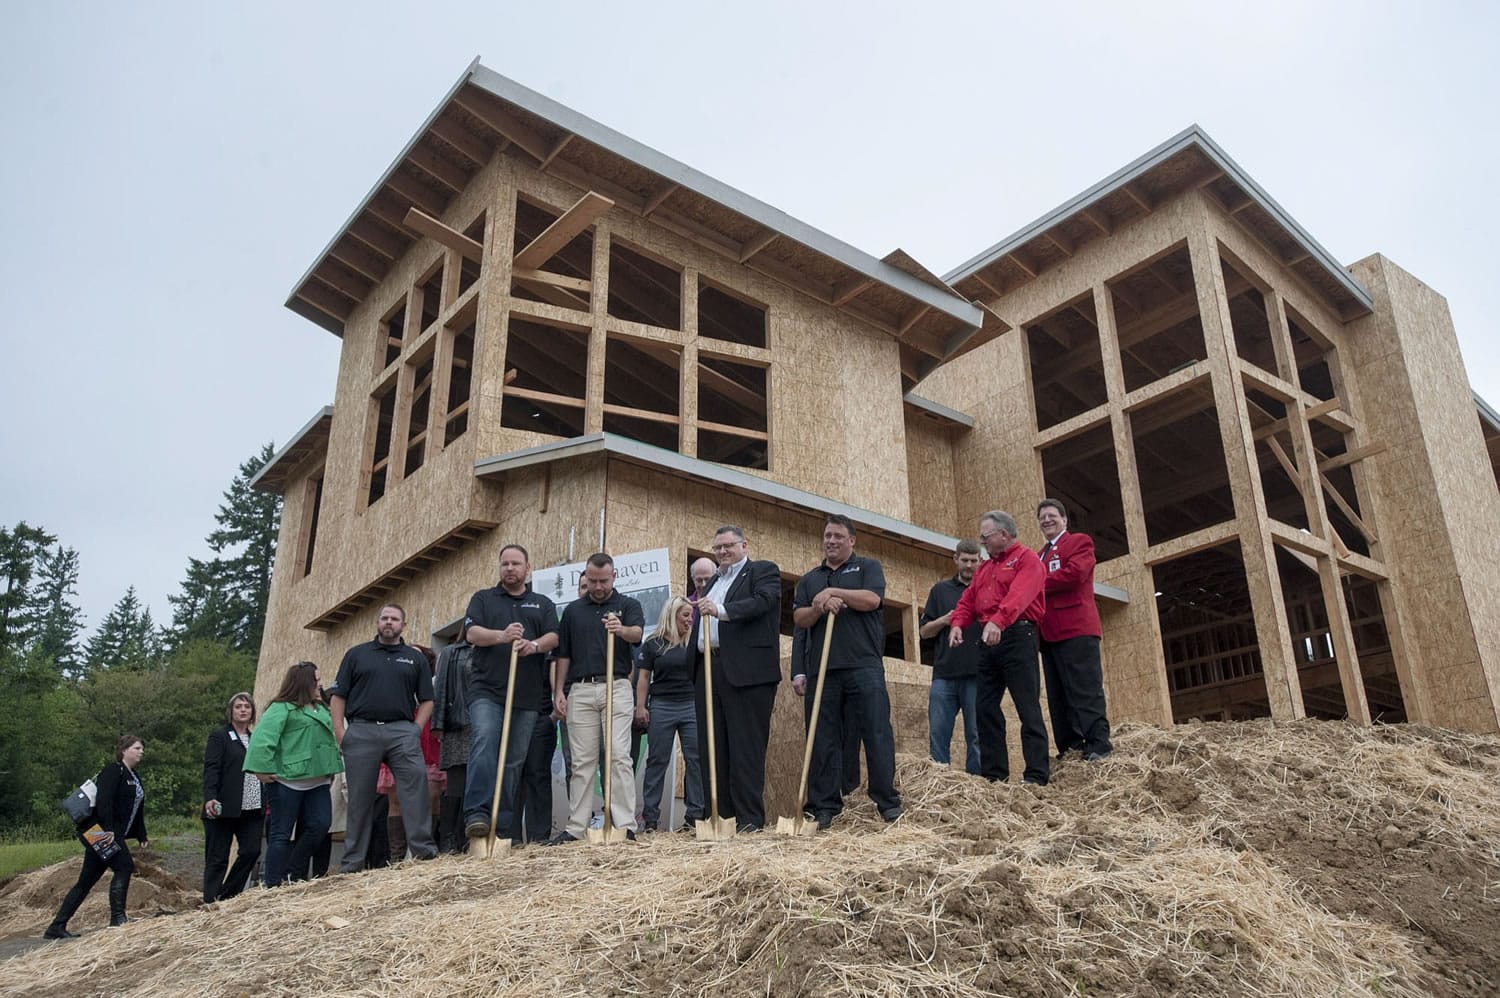 Visitors mark the ground-breaking Thursday for the Deerhaven subdivision of luxury homes in the north shore area of Lacamas Lake in Camas, where development is beginning after a major annexation by the city and years of planning.